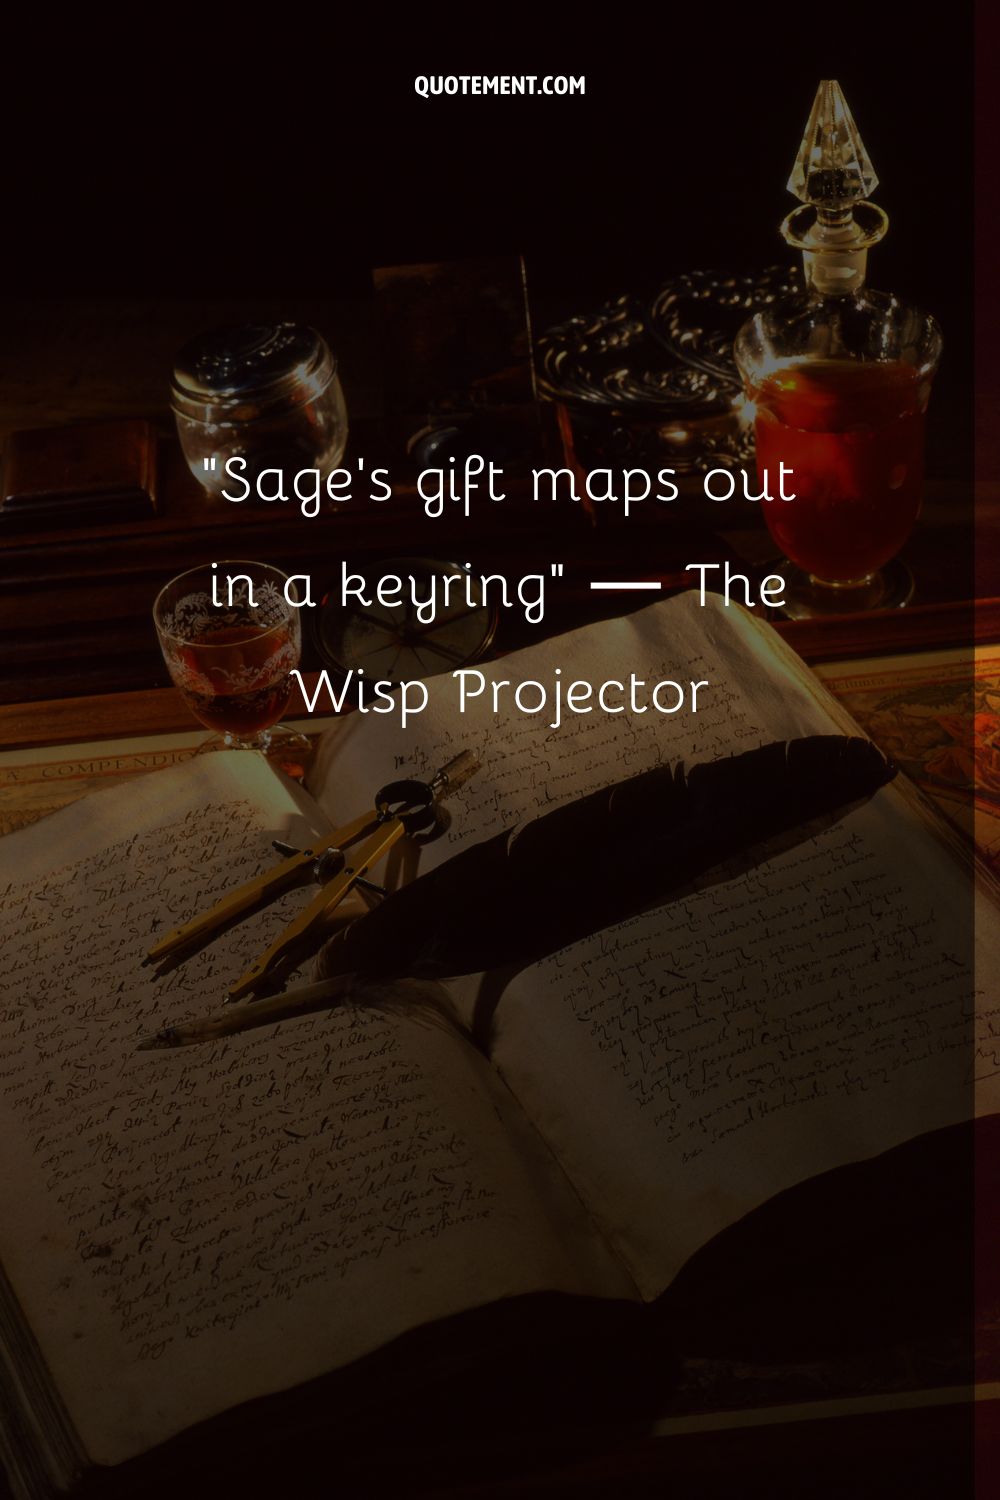 Sage's gift maps out in a keyring